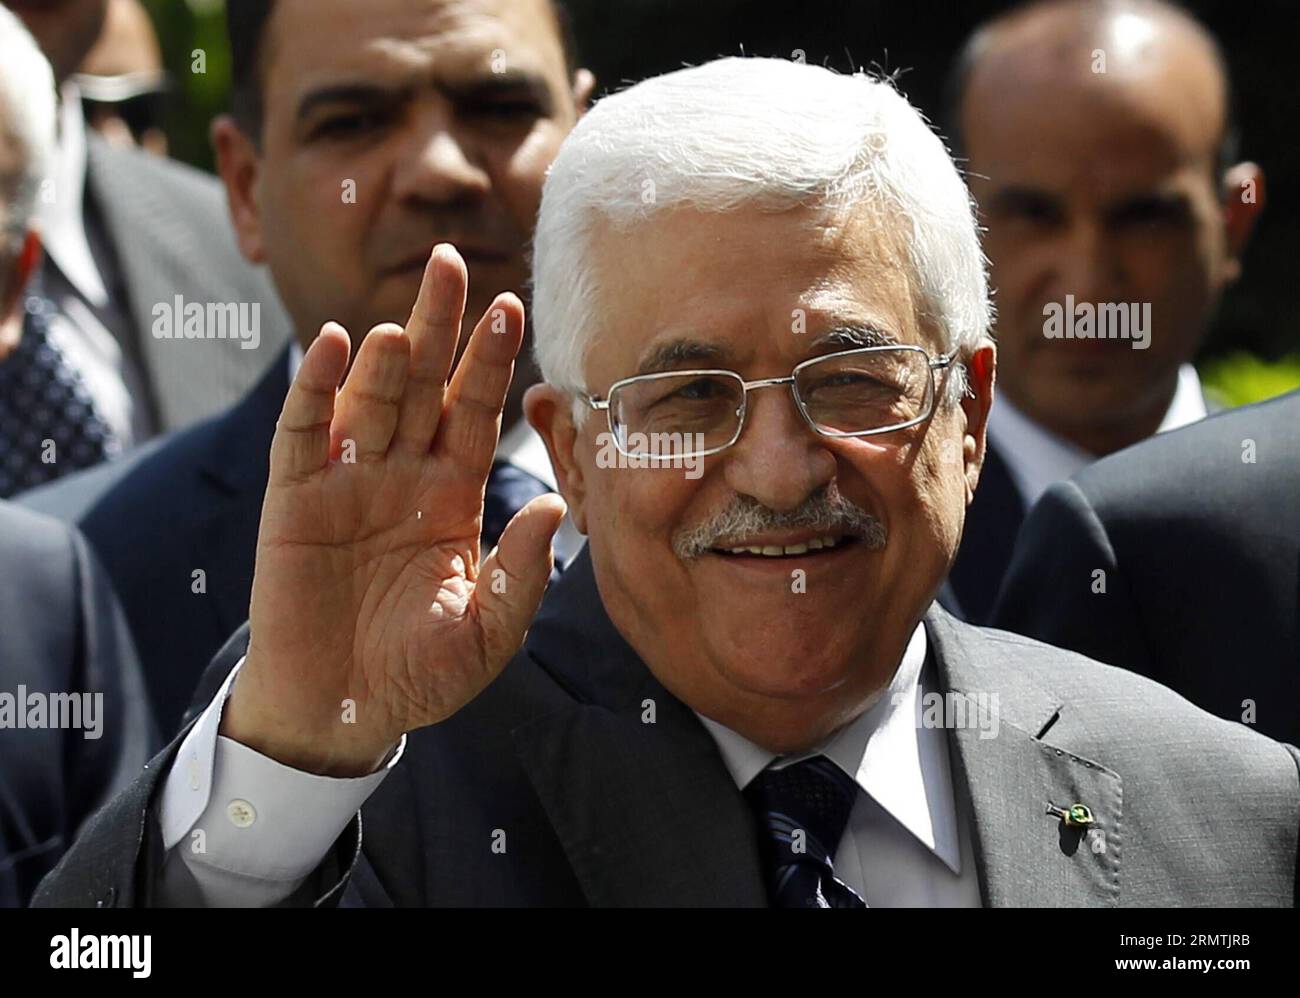 (140907) -- CAIRO, Sept. 7, 2014 -- Palestinian President Mahmoud Abbas waves as he attends an Arab League emergency meeting in Cairo, Egypt, Sept. 7, 2014. Arab foreign ministers were expected to issue a resolution to confront militants overrunning large areas of Iraq and Syria and declared a cross-border Islamic States. ) EGYPT-ARAB LEAGUE-EMERGENCY MEETING AhmedxGomaa PUBLICATIONxNOTxINxCHN   Cairo Sept 7 2014 PALESTINIAN President Mahmoud Abbas Waves As he Attends to Arab League EMERGENCY Meeting in Cairo Egypt Sept 7 2014 Arab Foreign Minister Were expected to Issue a Resolution to confro Stock Photo